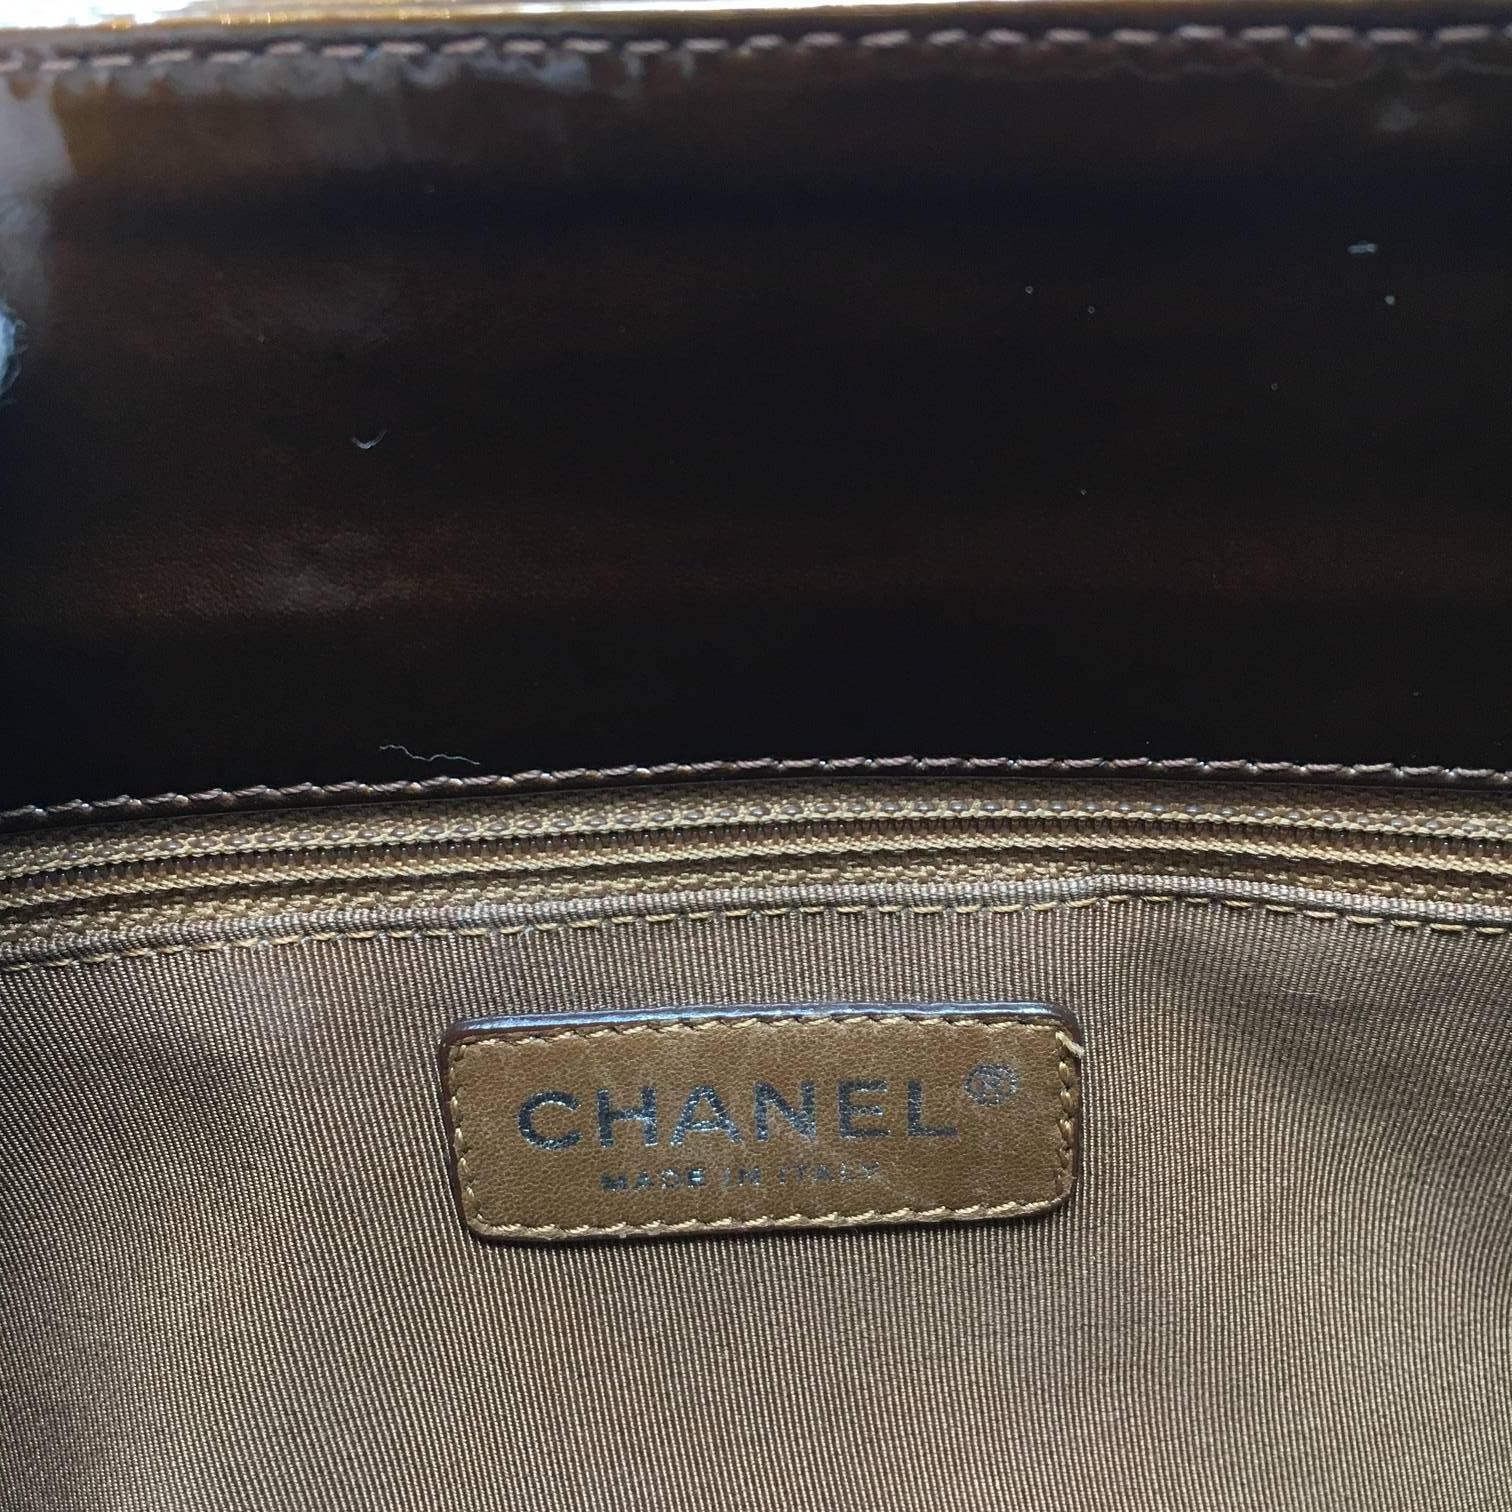 Chanel Vernis Gst Grand Shopping Tote Chain Bag, 2008/2009 7